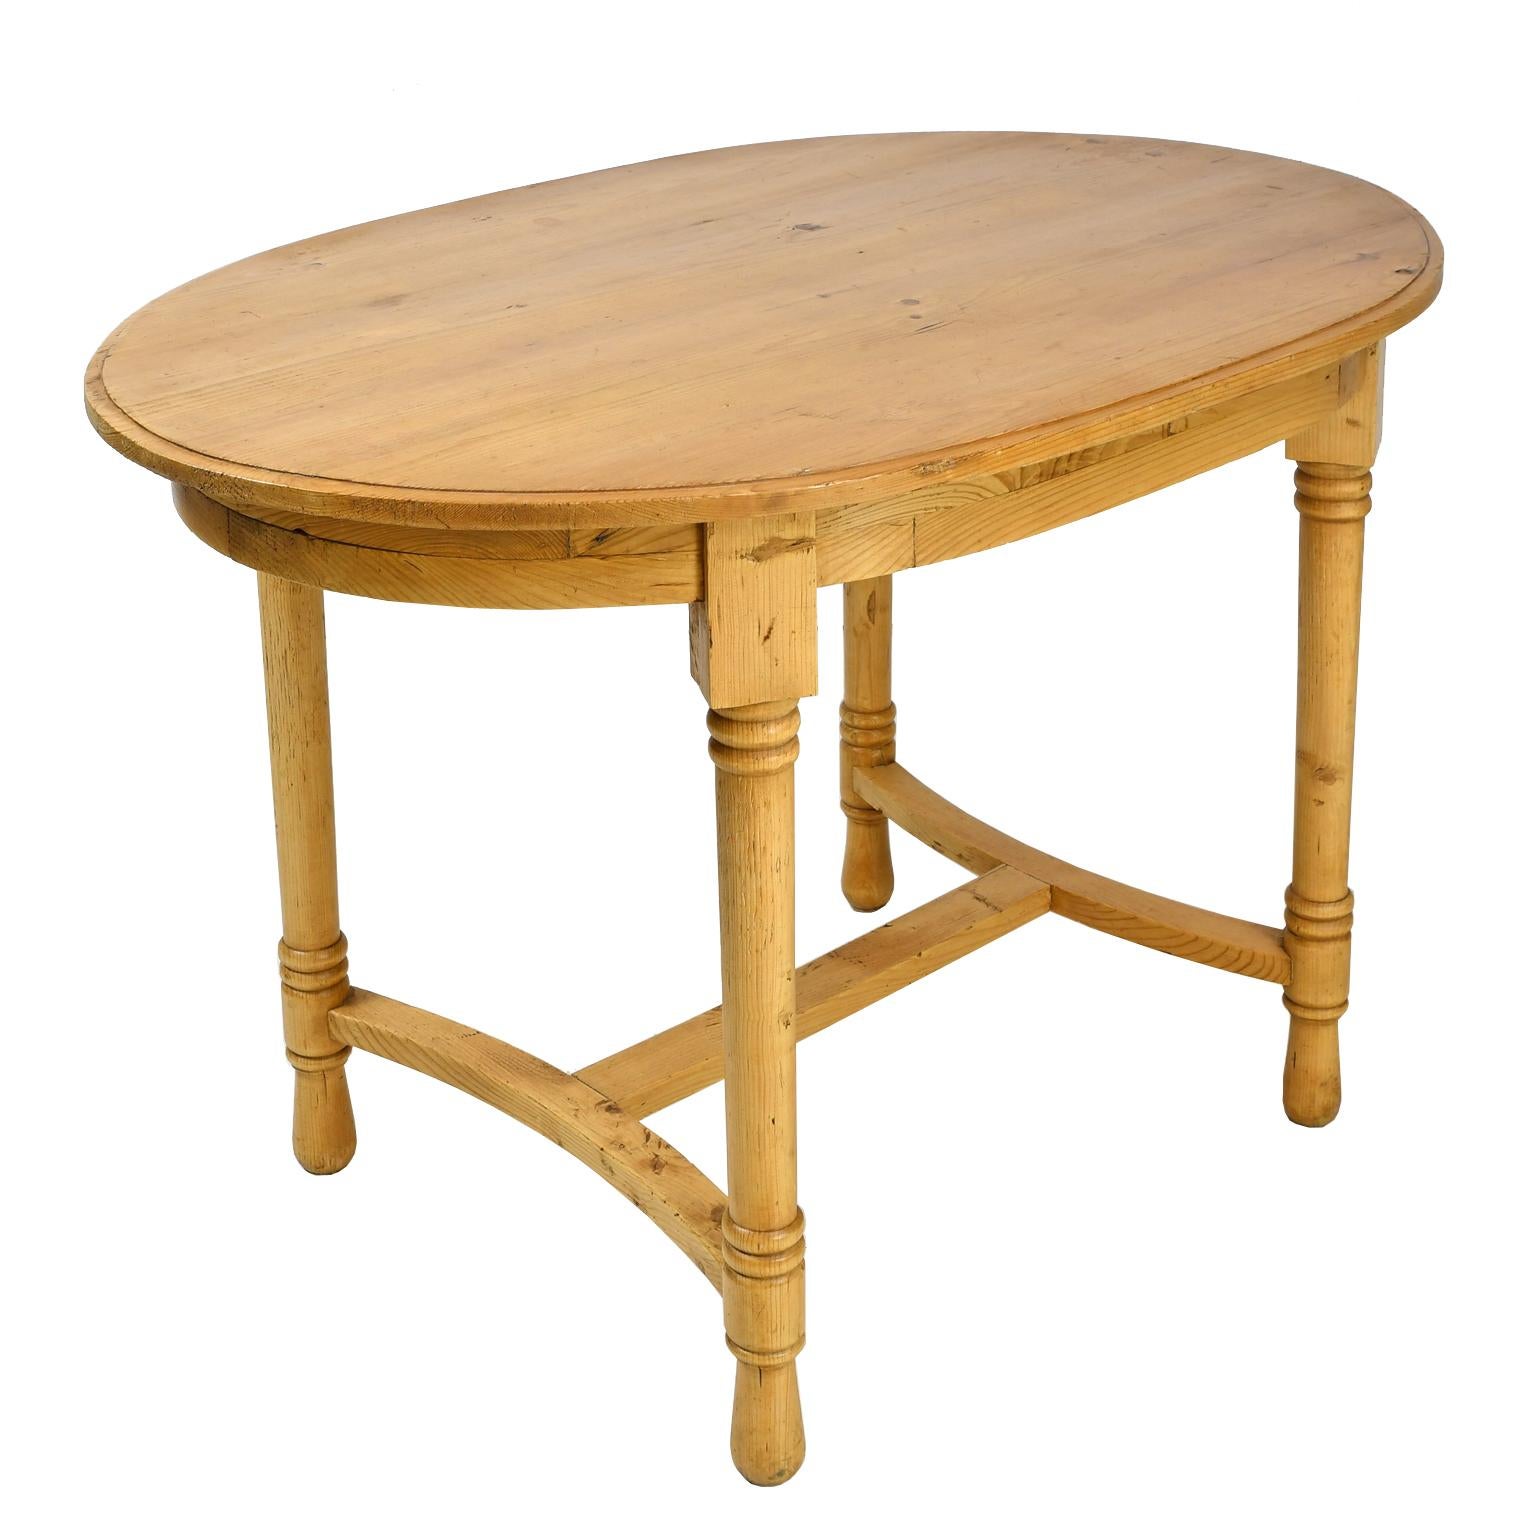 Hand-Crafted Antique European Oval Table in Pine, Danish or German, circa 1900